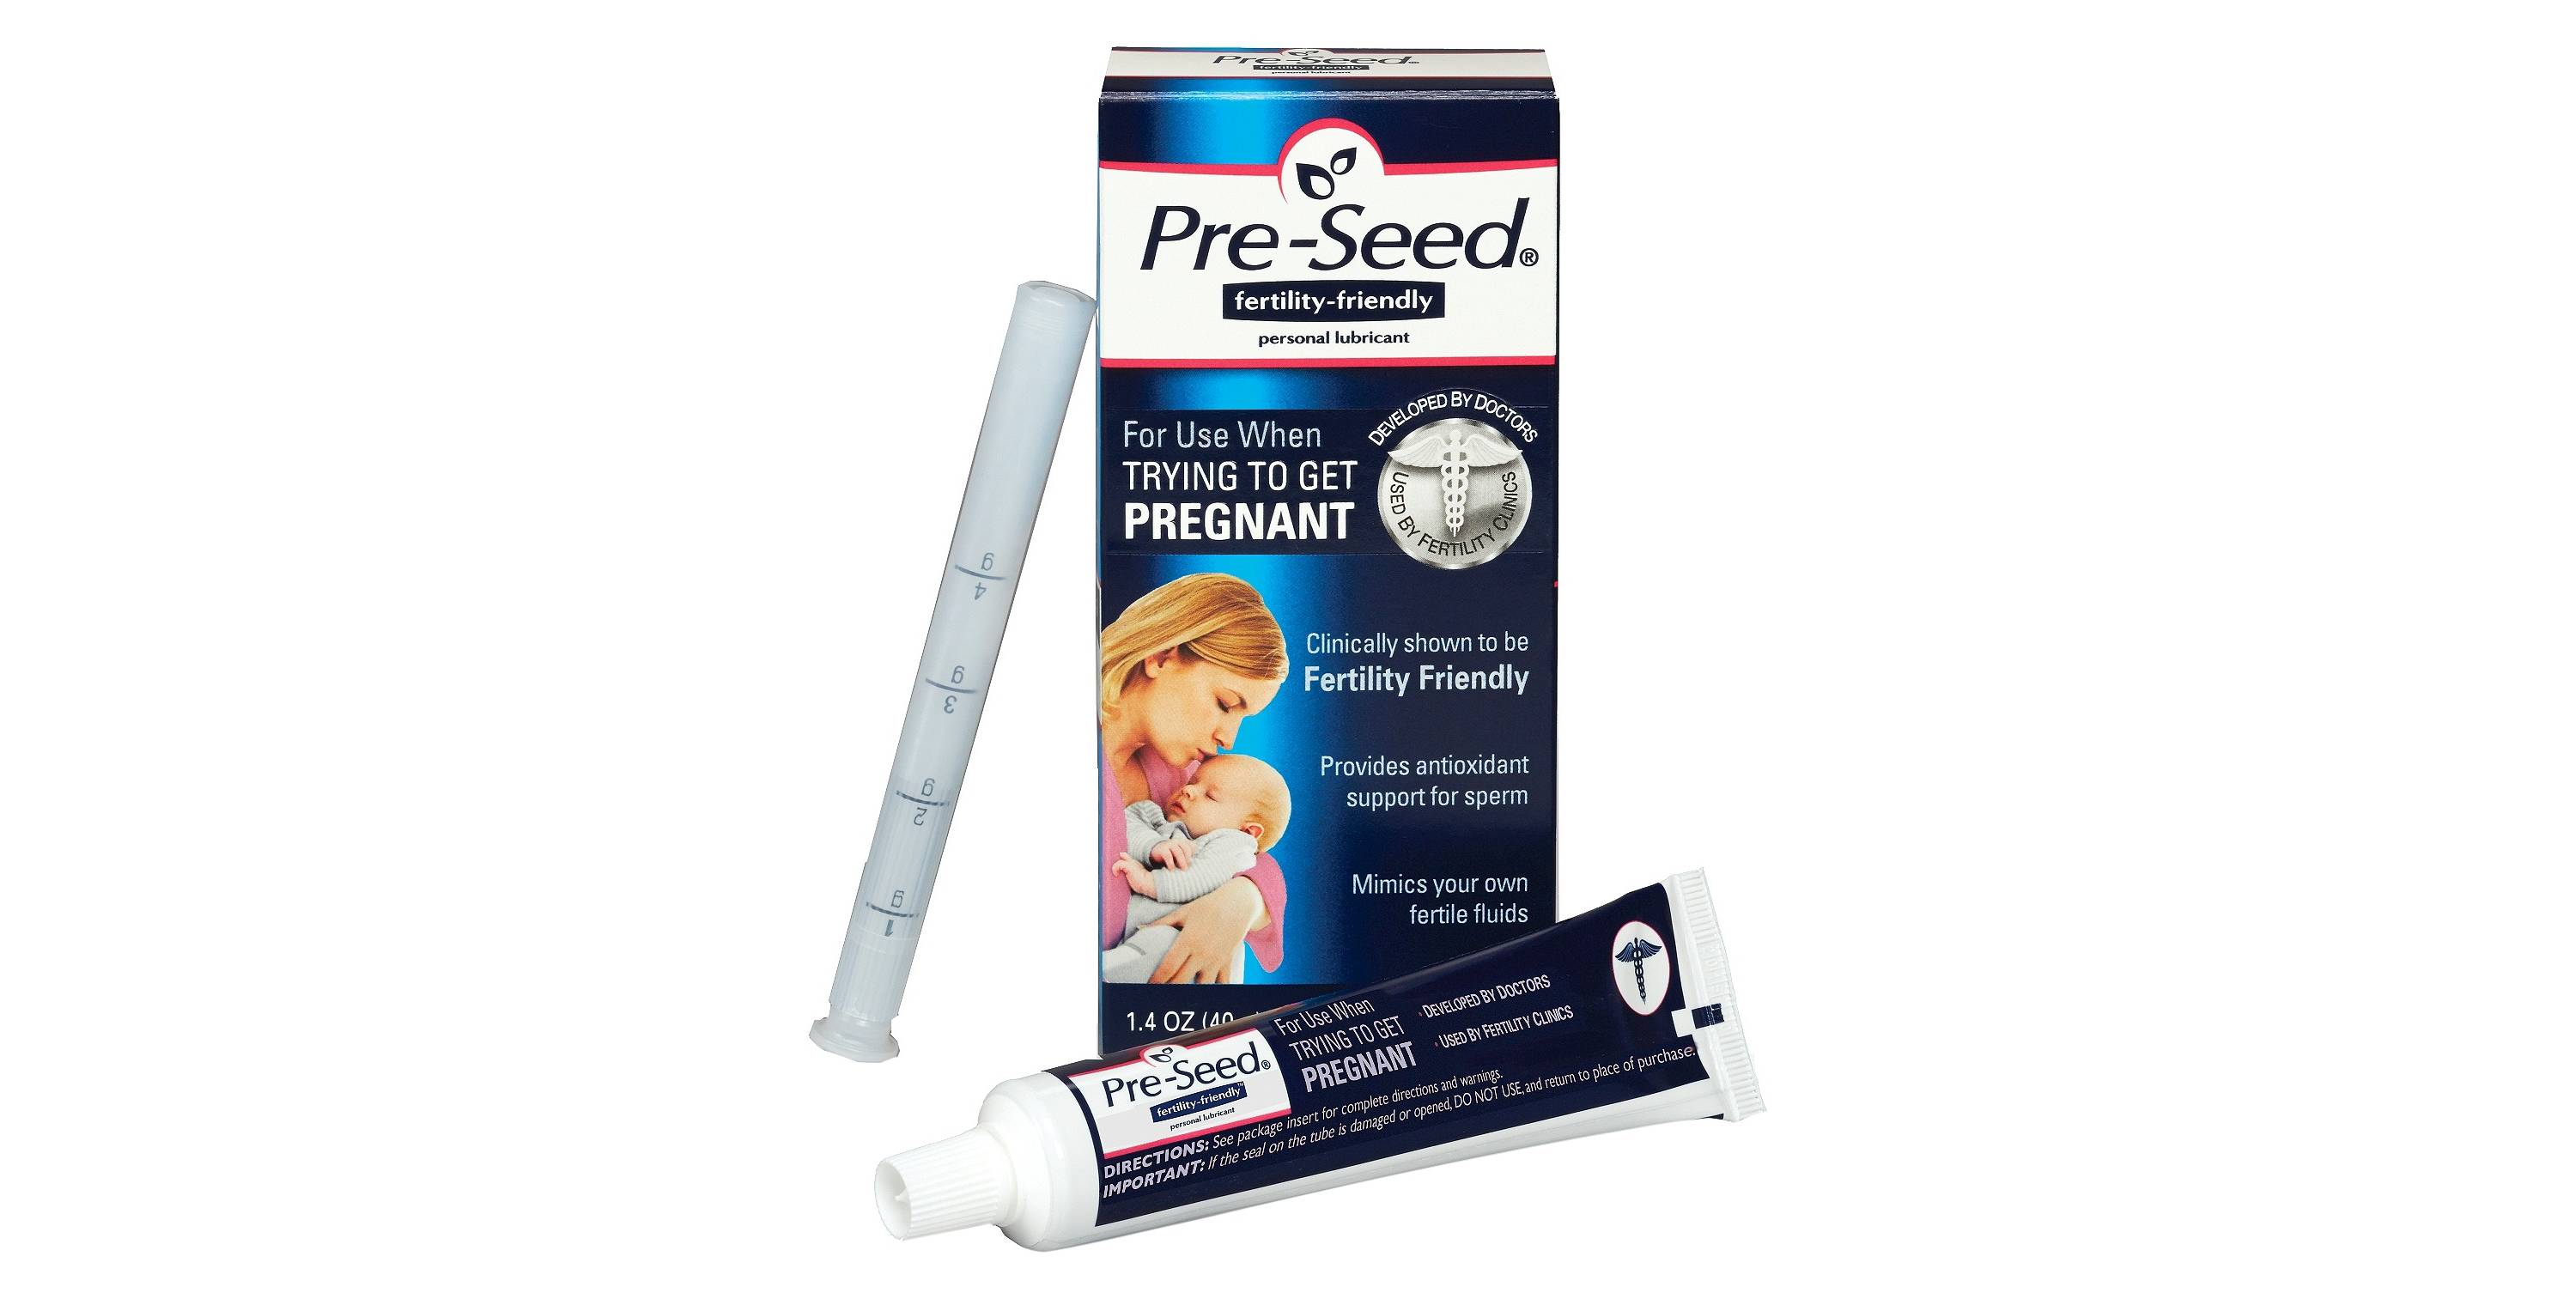 What are the benefits of Pre-Seed Personal Lubricant?